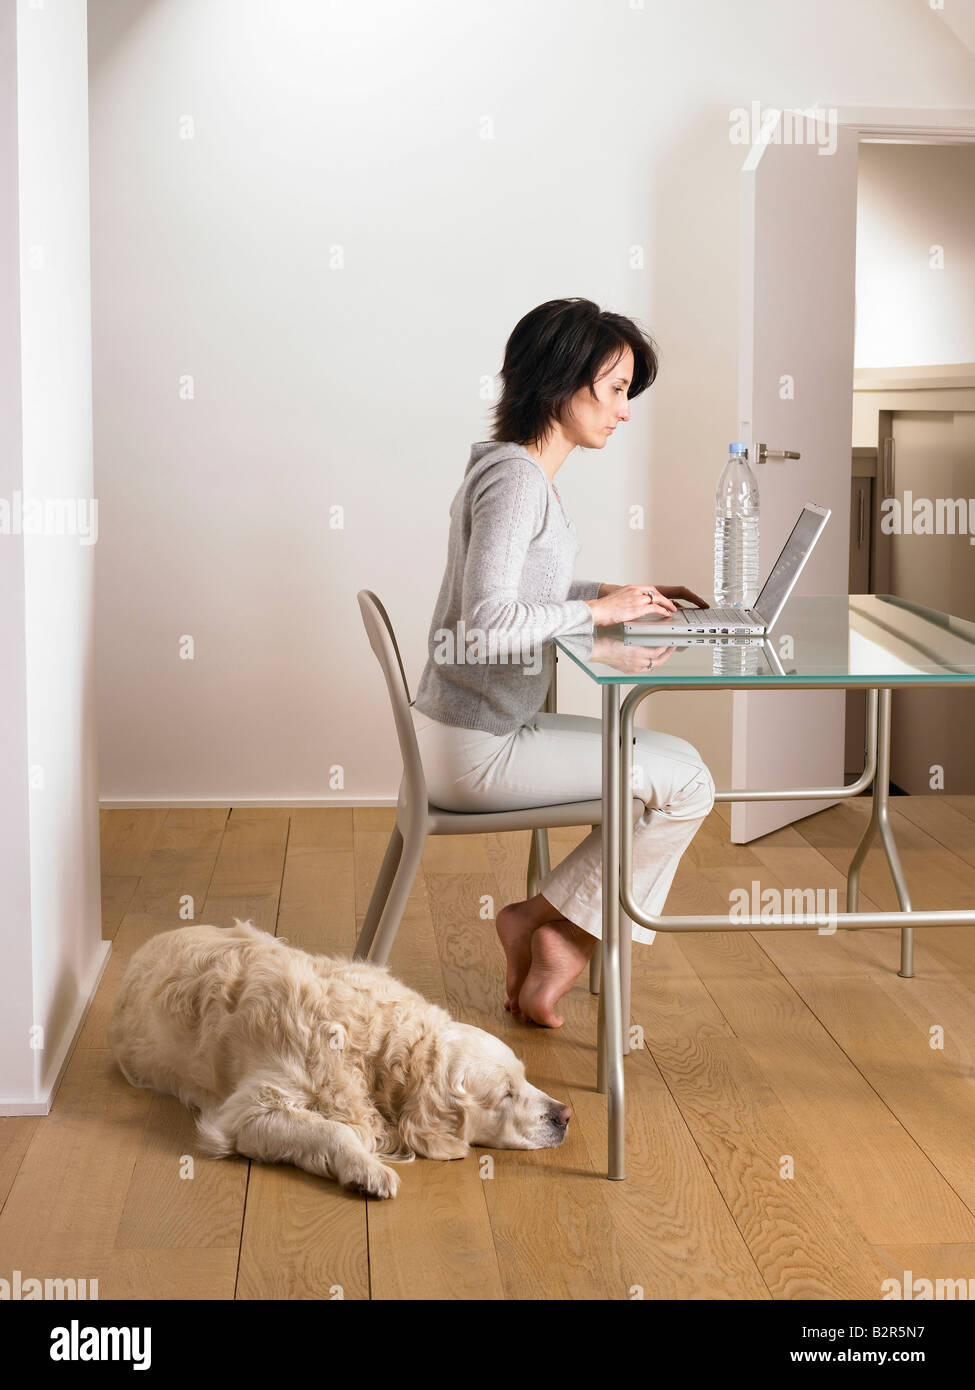 Woman at her desk, dog sleeping Stock Photo